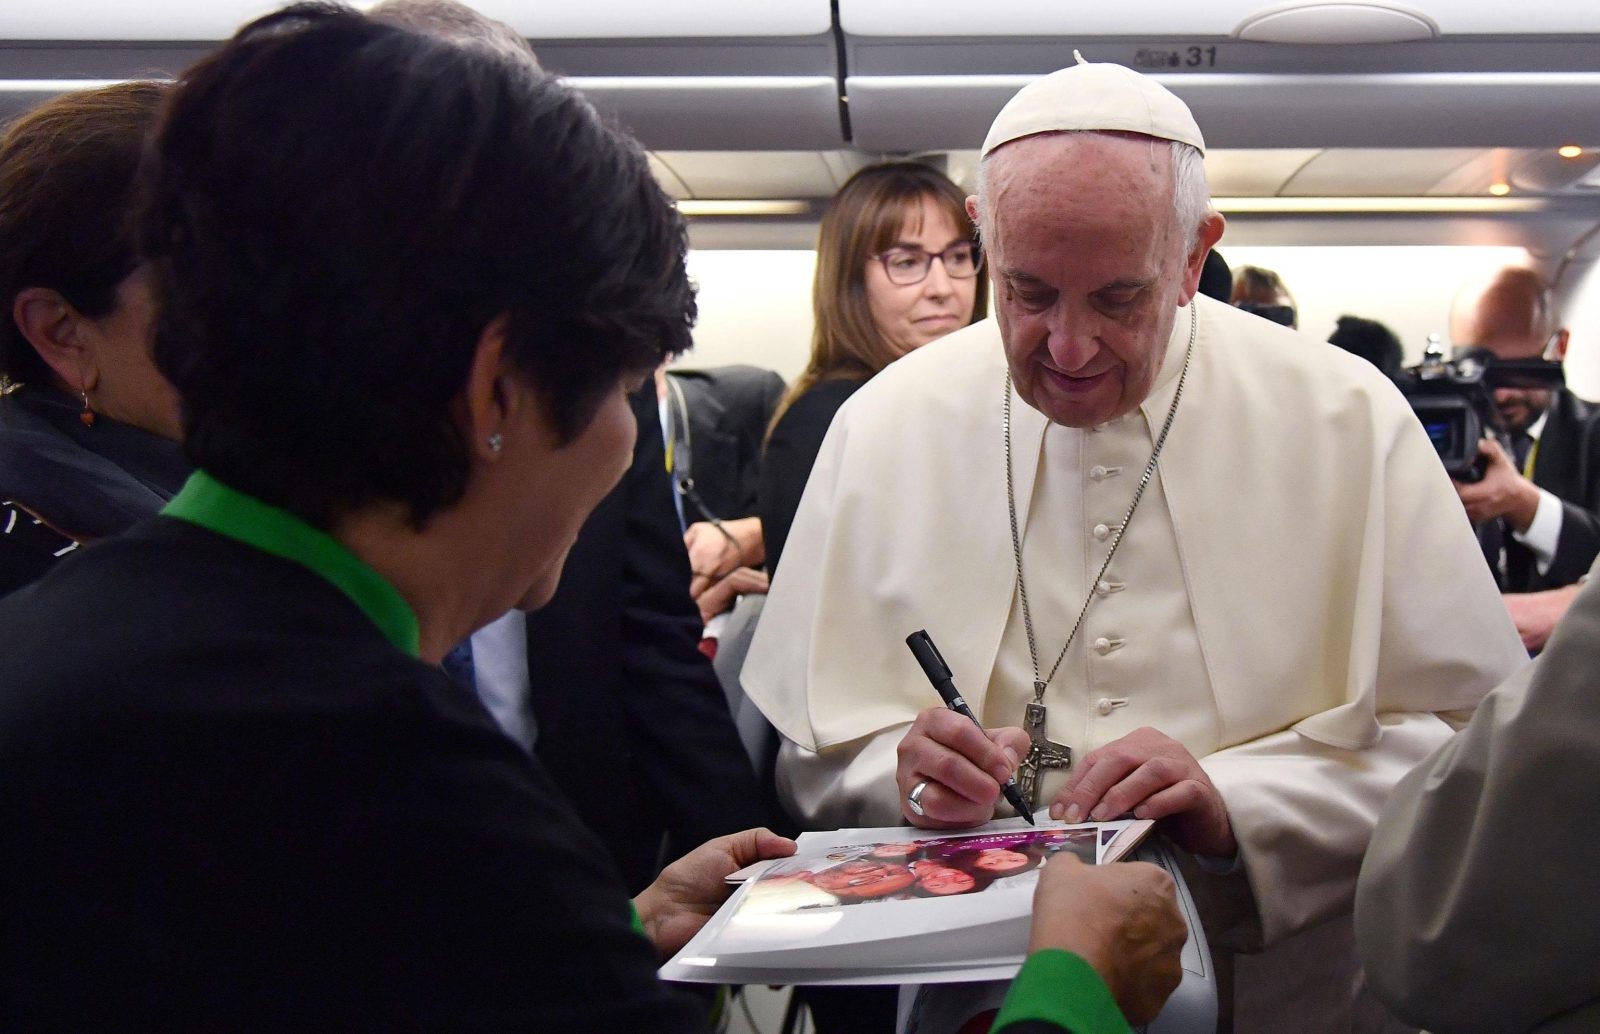 epa06353369 Pope Francis signs autographs aboard a flight from Italy to Myanmar, 26 November 2017. Pope Francis' visit in Myanmar and Bangladesh runs from 27 November to 02 December 2017.  EPA/ETTORE FERRARI / POOL 
Dostawca: PAP/EPA.